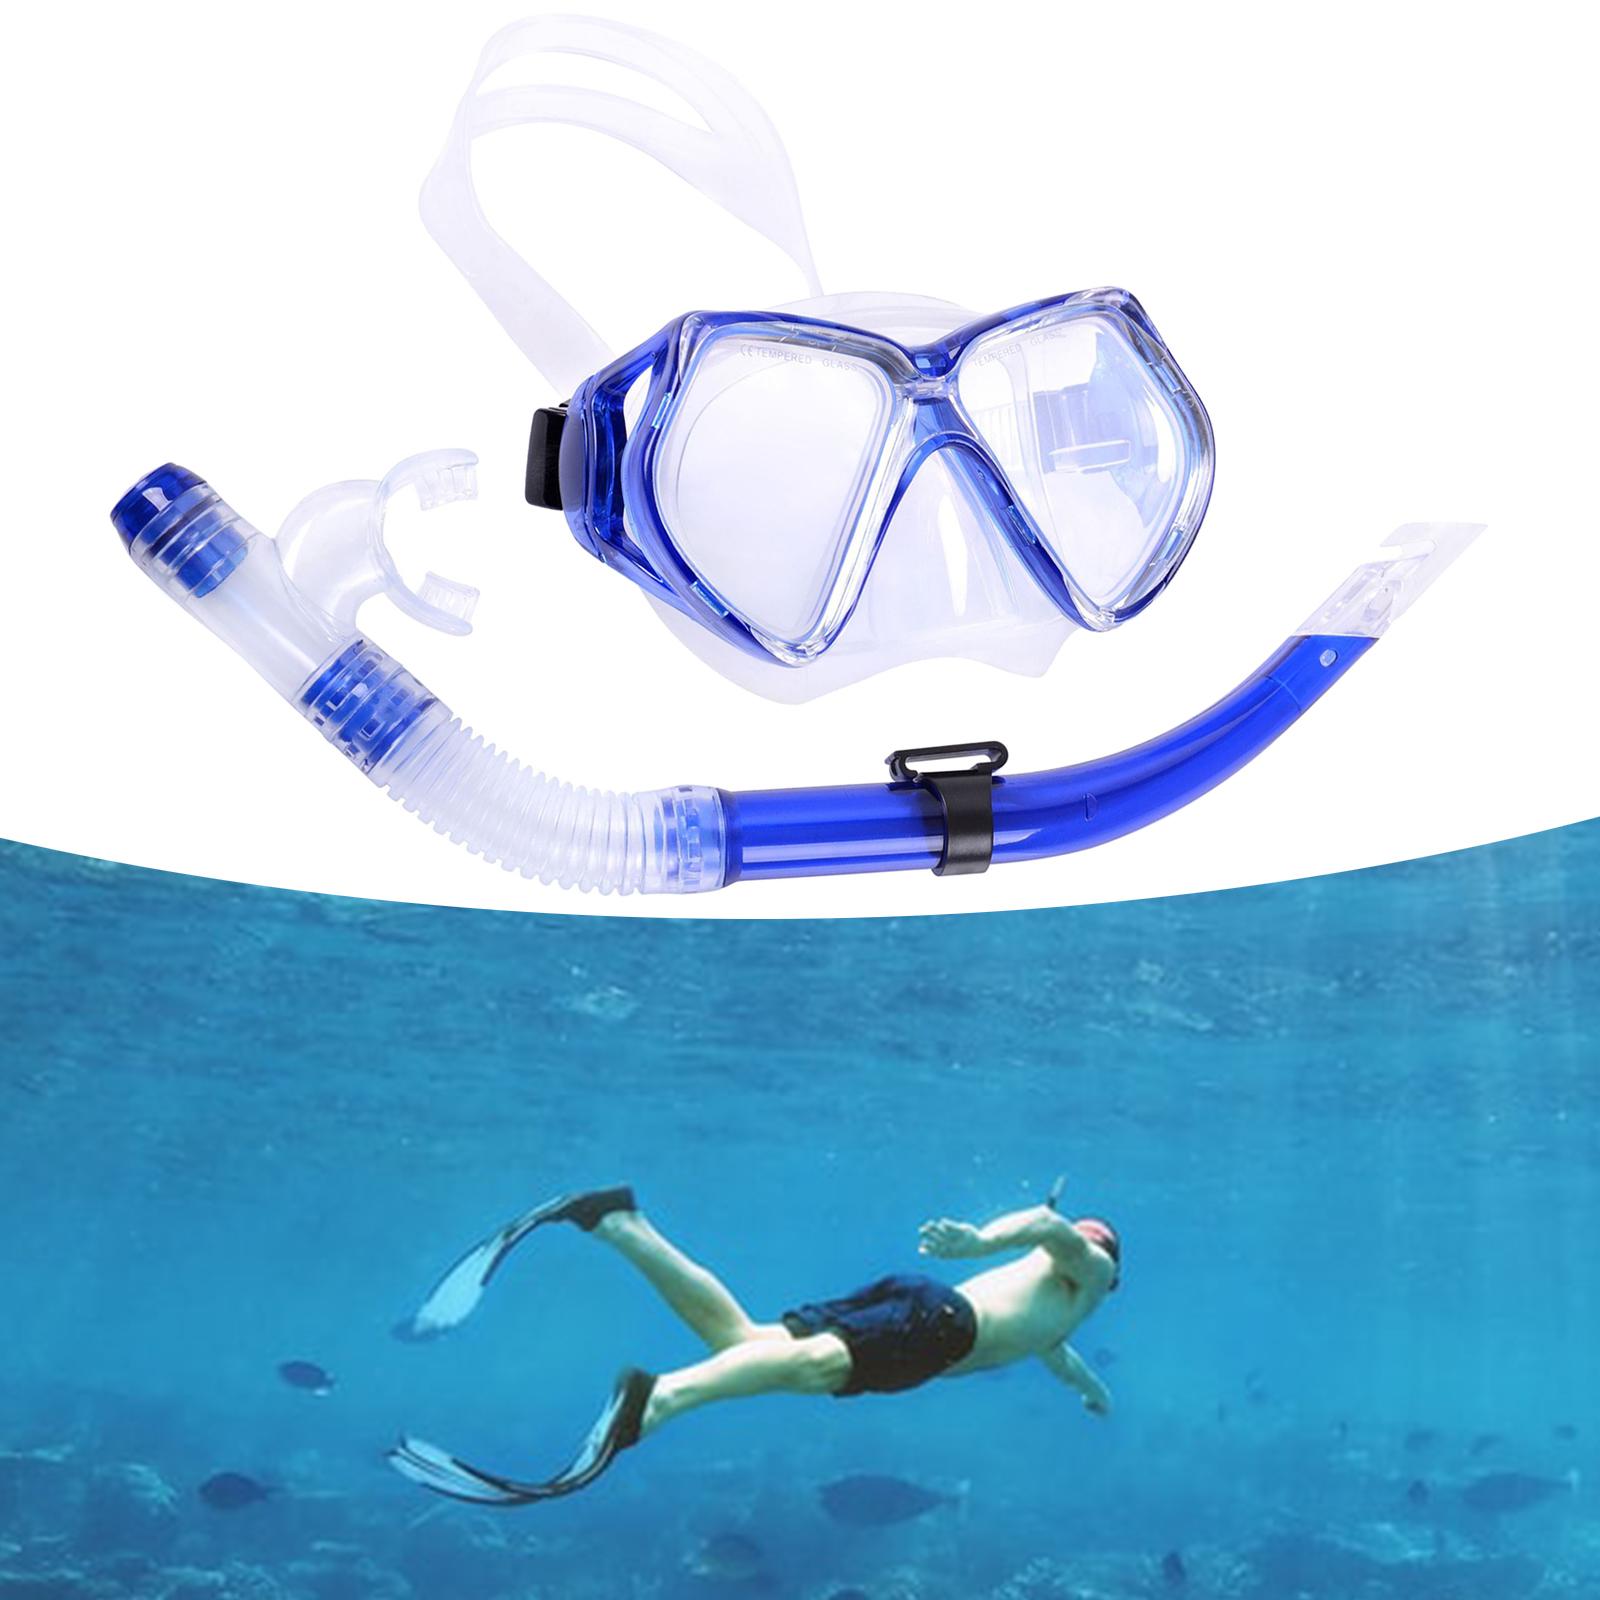 Snorkel Set Dive Mask Snorkeling Gear Diving Tempered Glass Goggles Swimming Blue